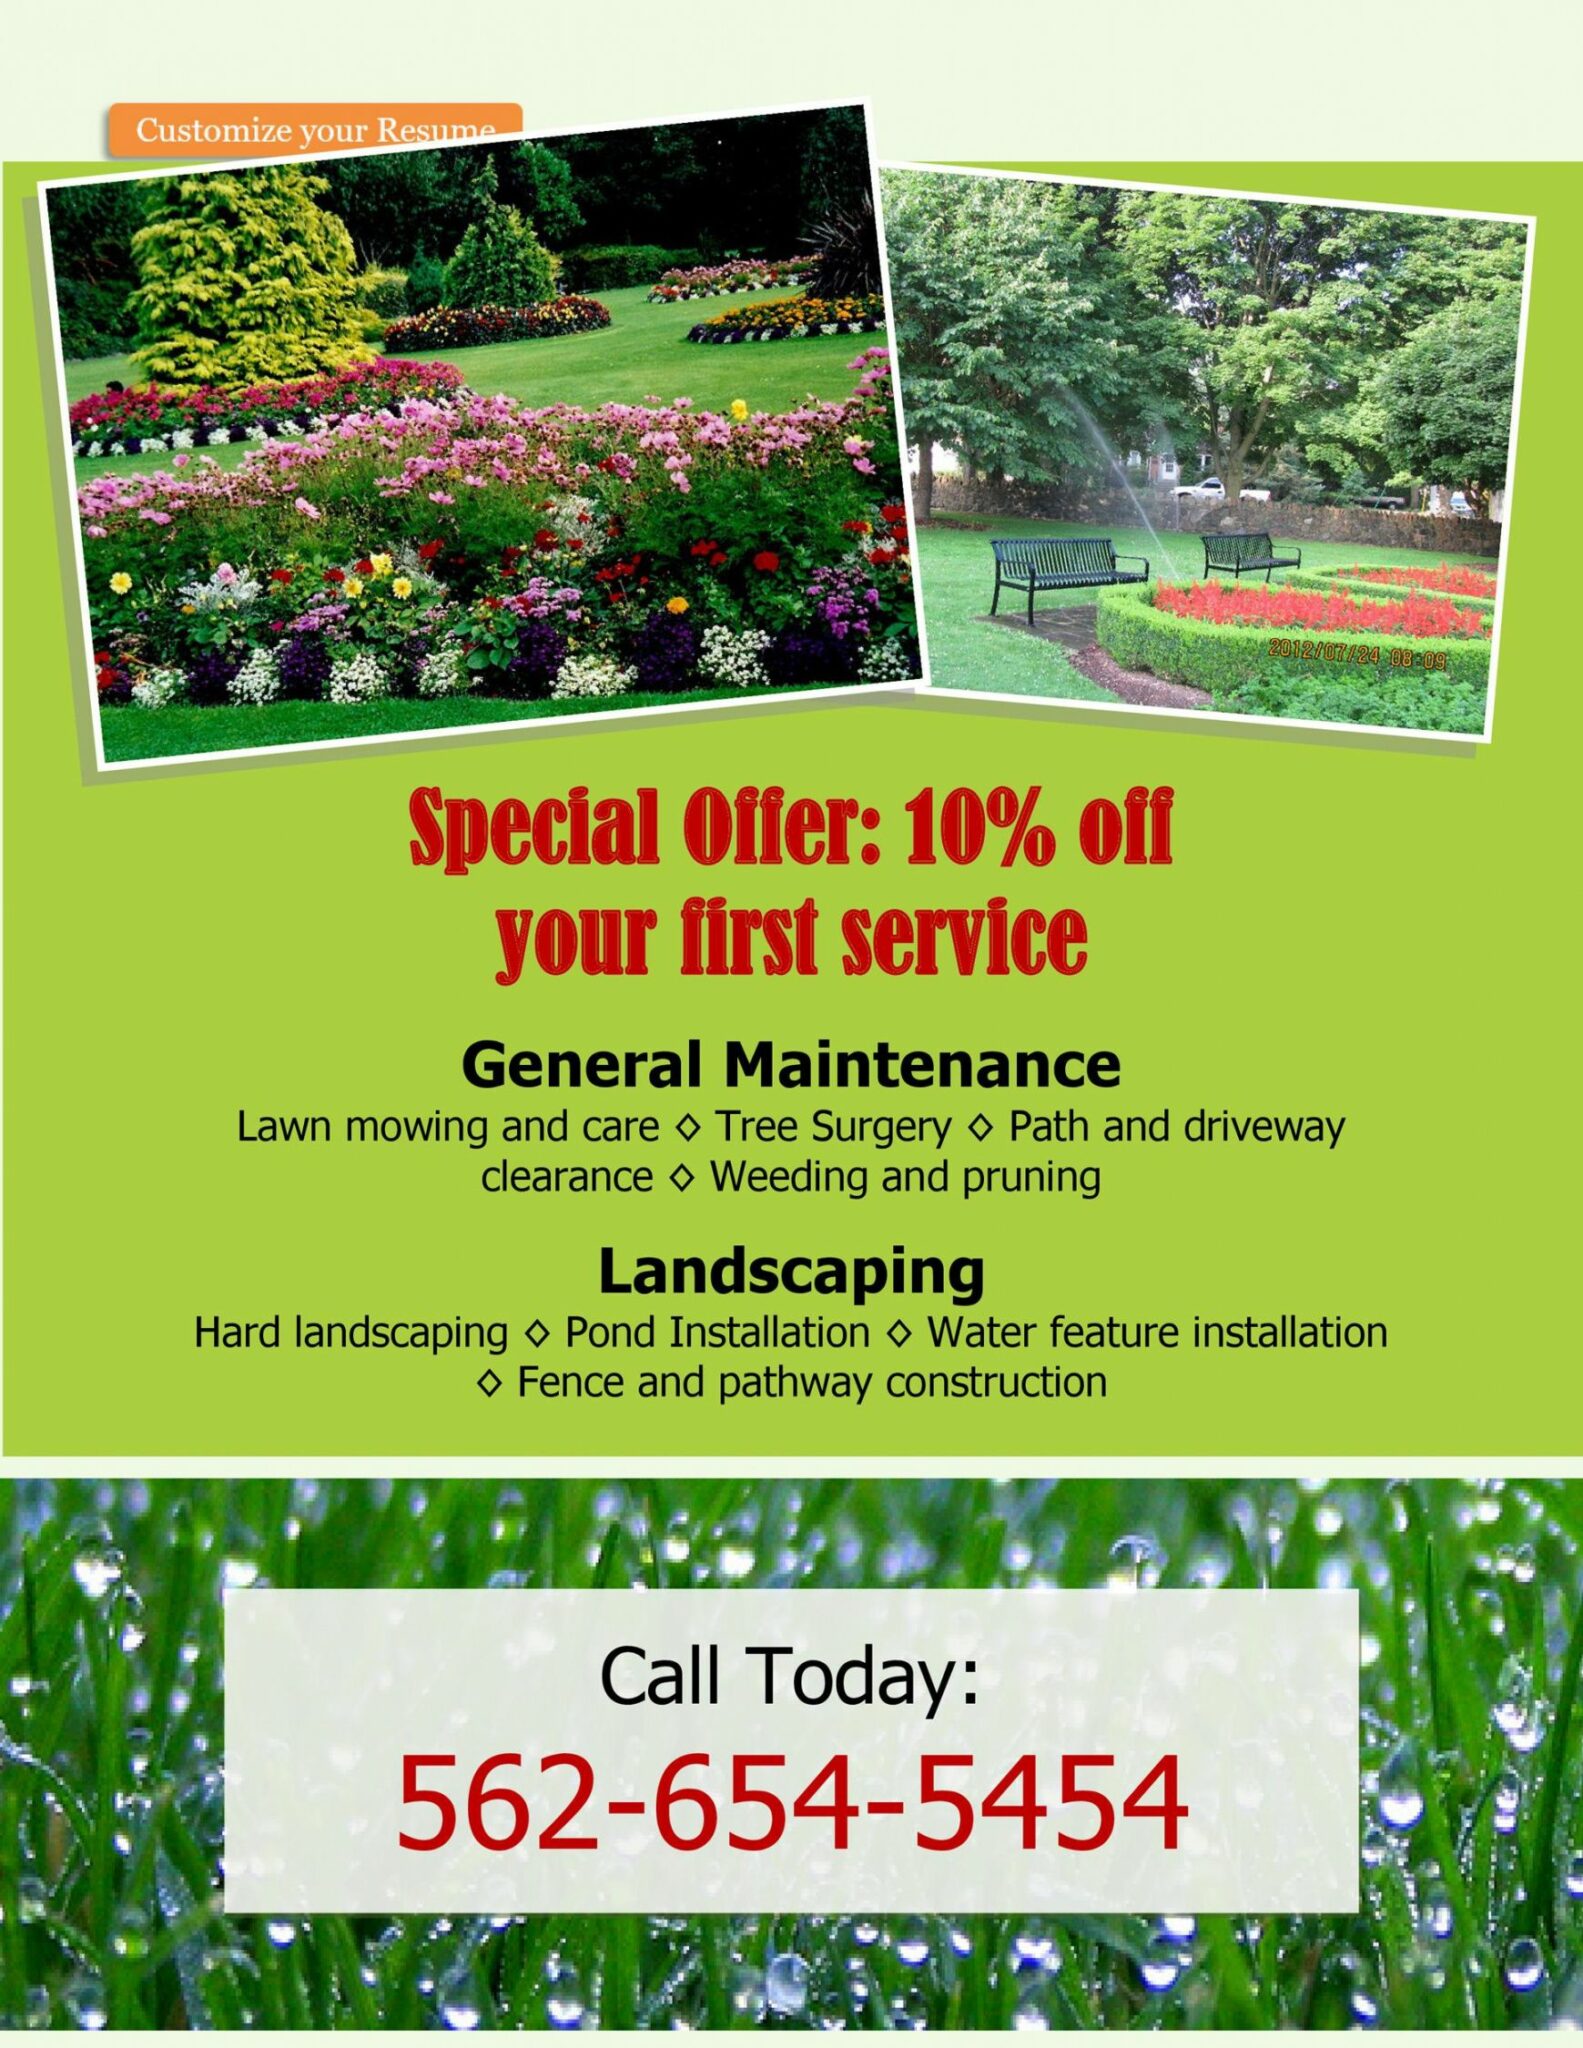 Sample 30 Free Lawn Care Flyer Templates [Lawn Mower Flyers] ᐅ Lawn